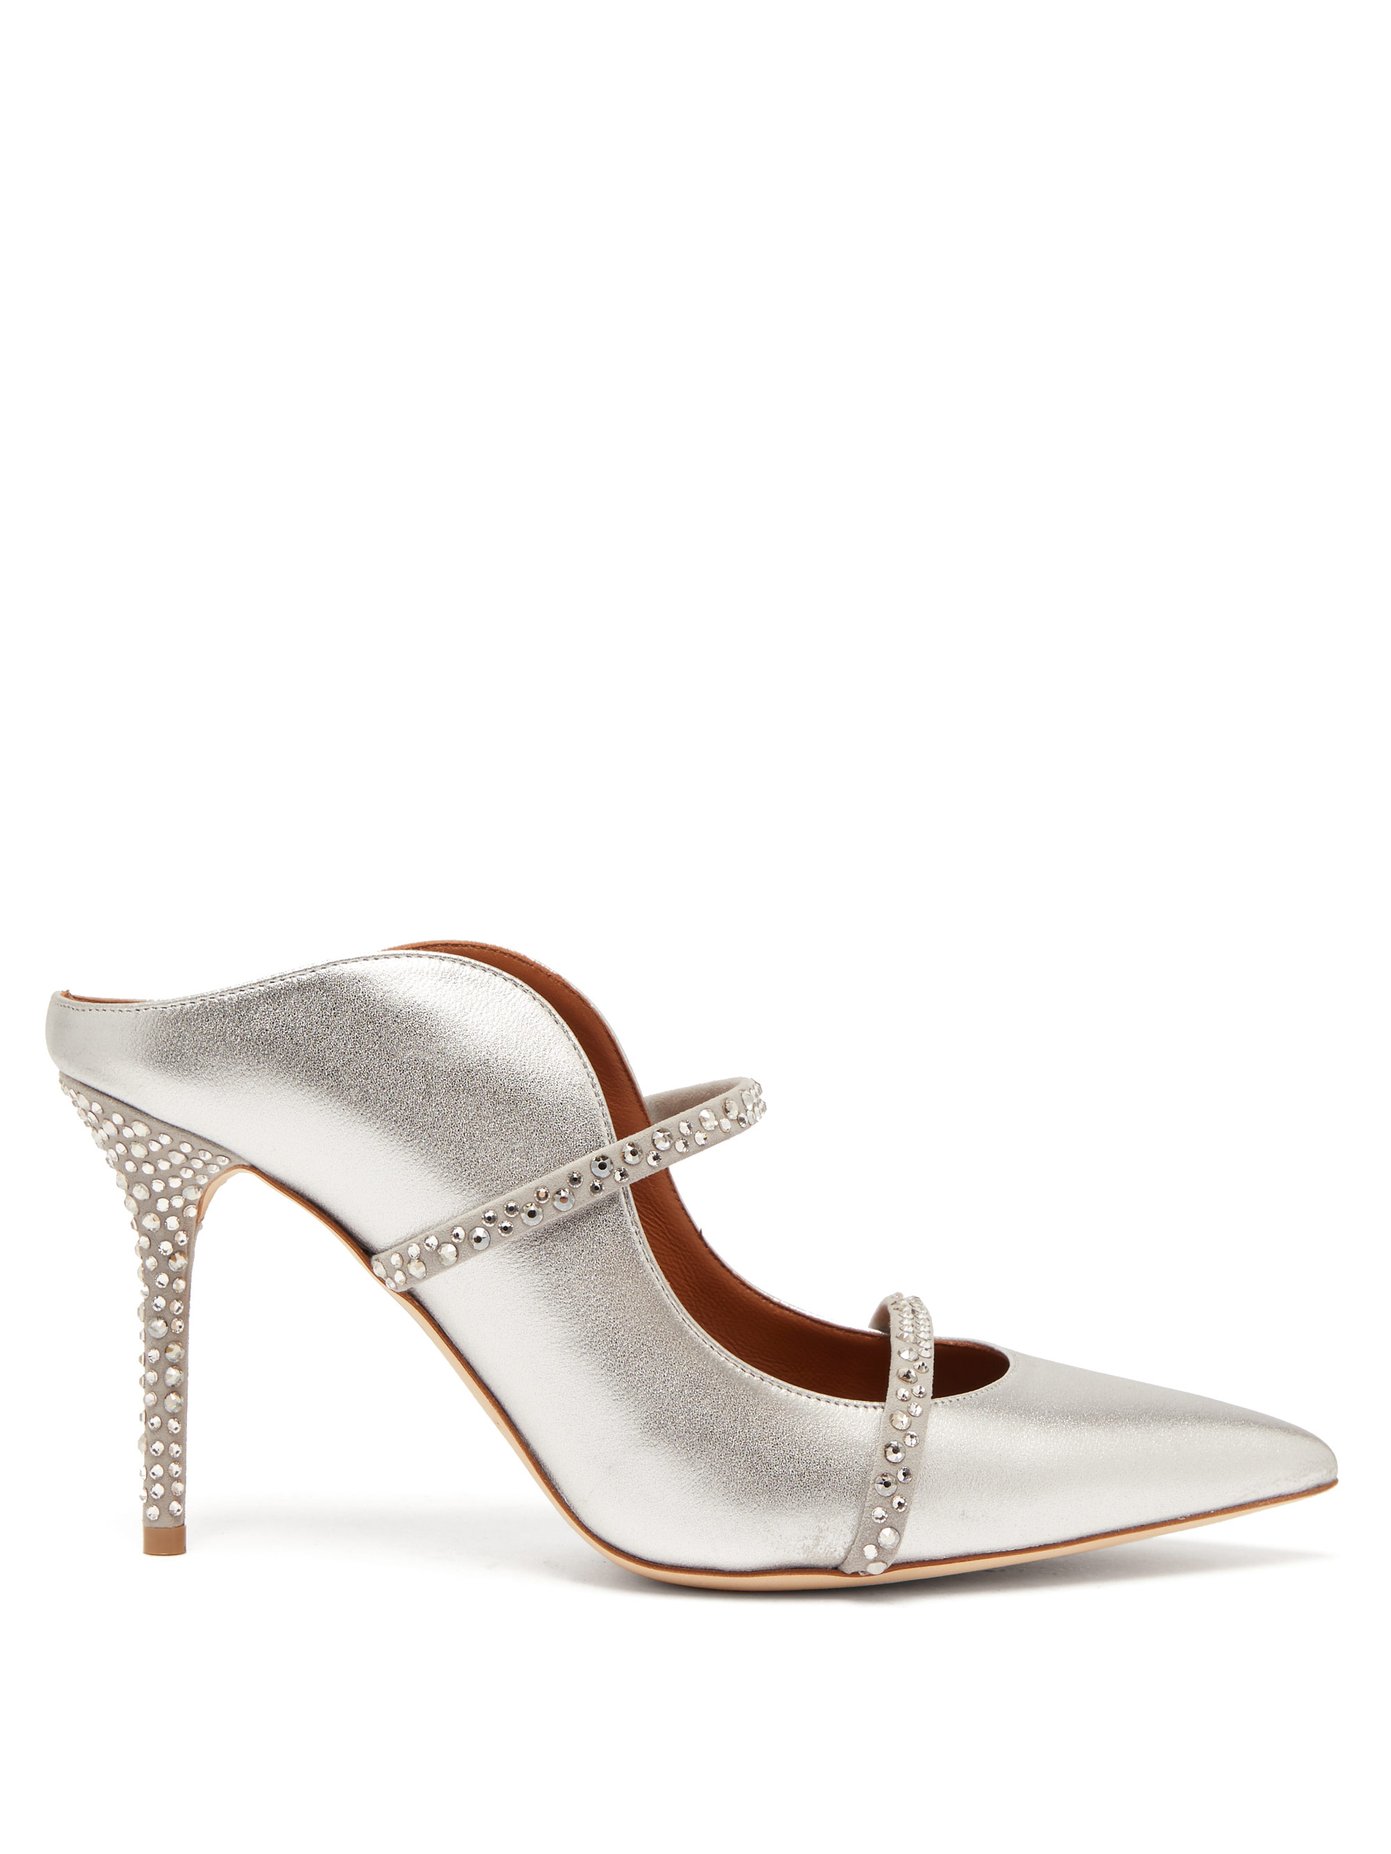 malone souliers silver